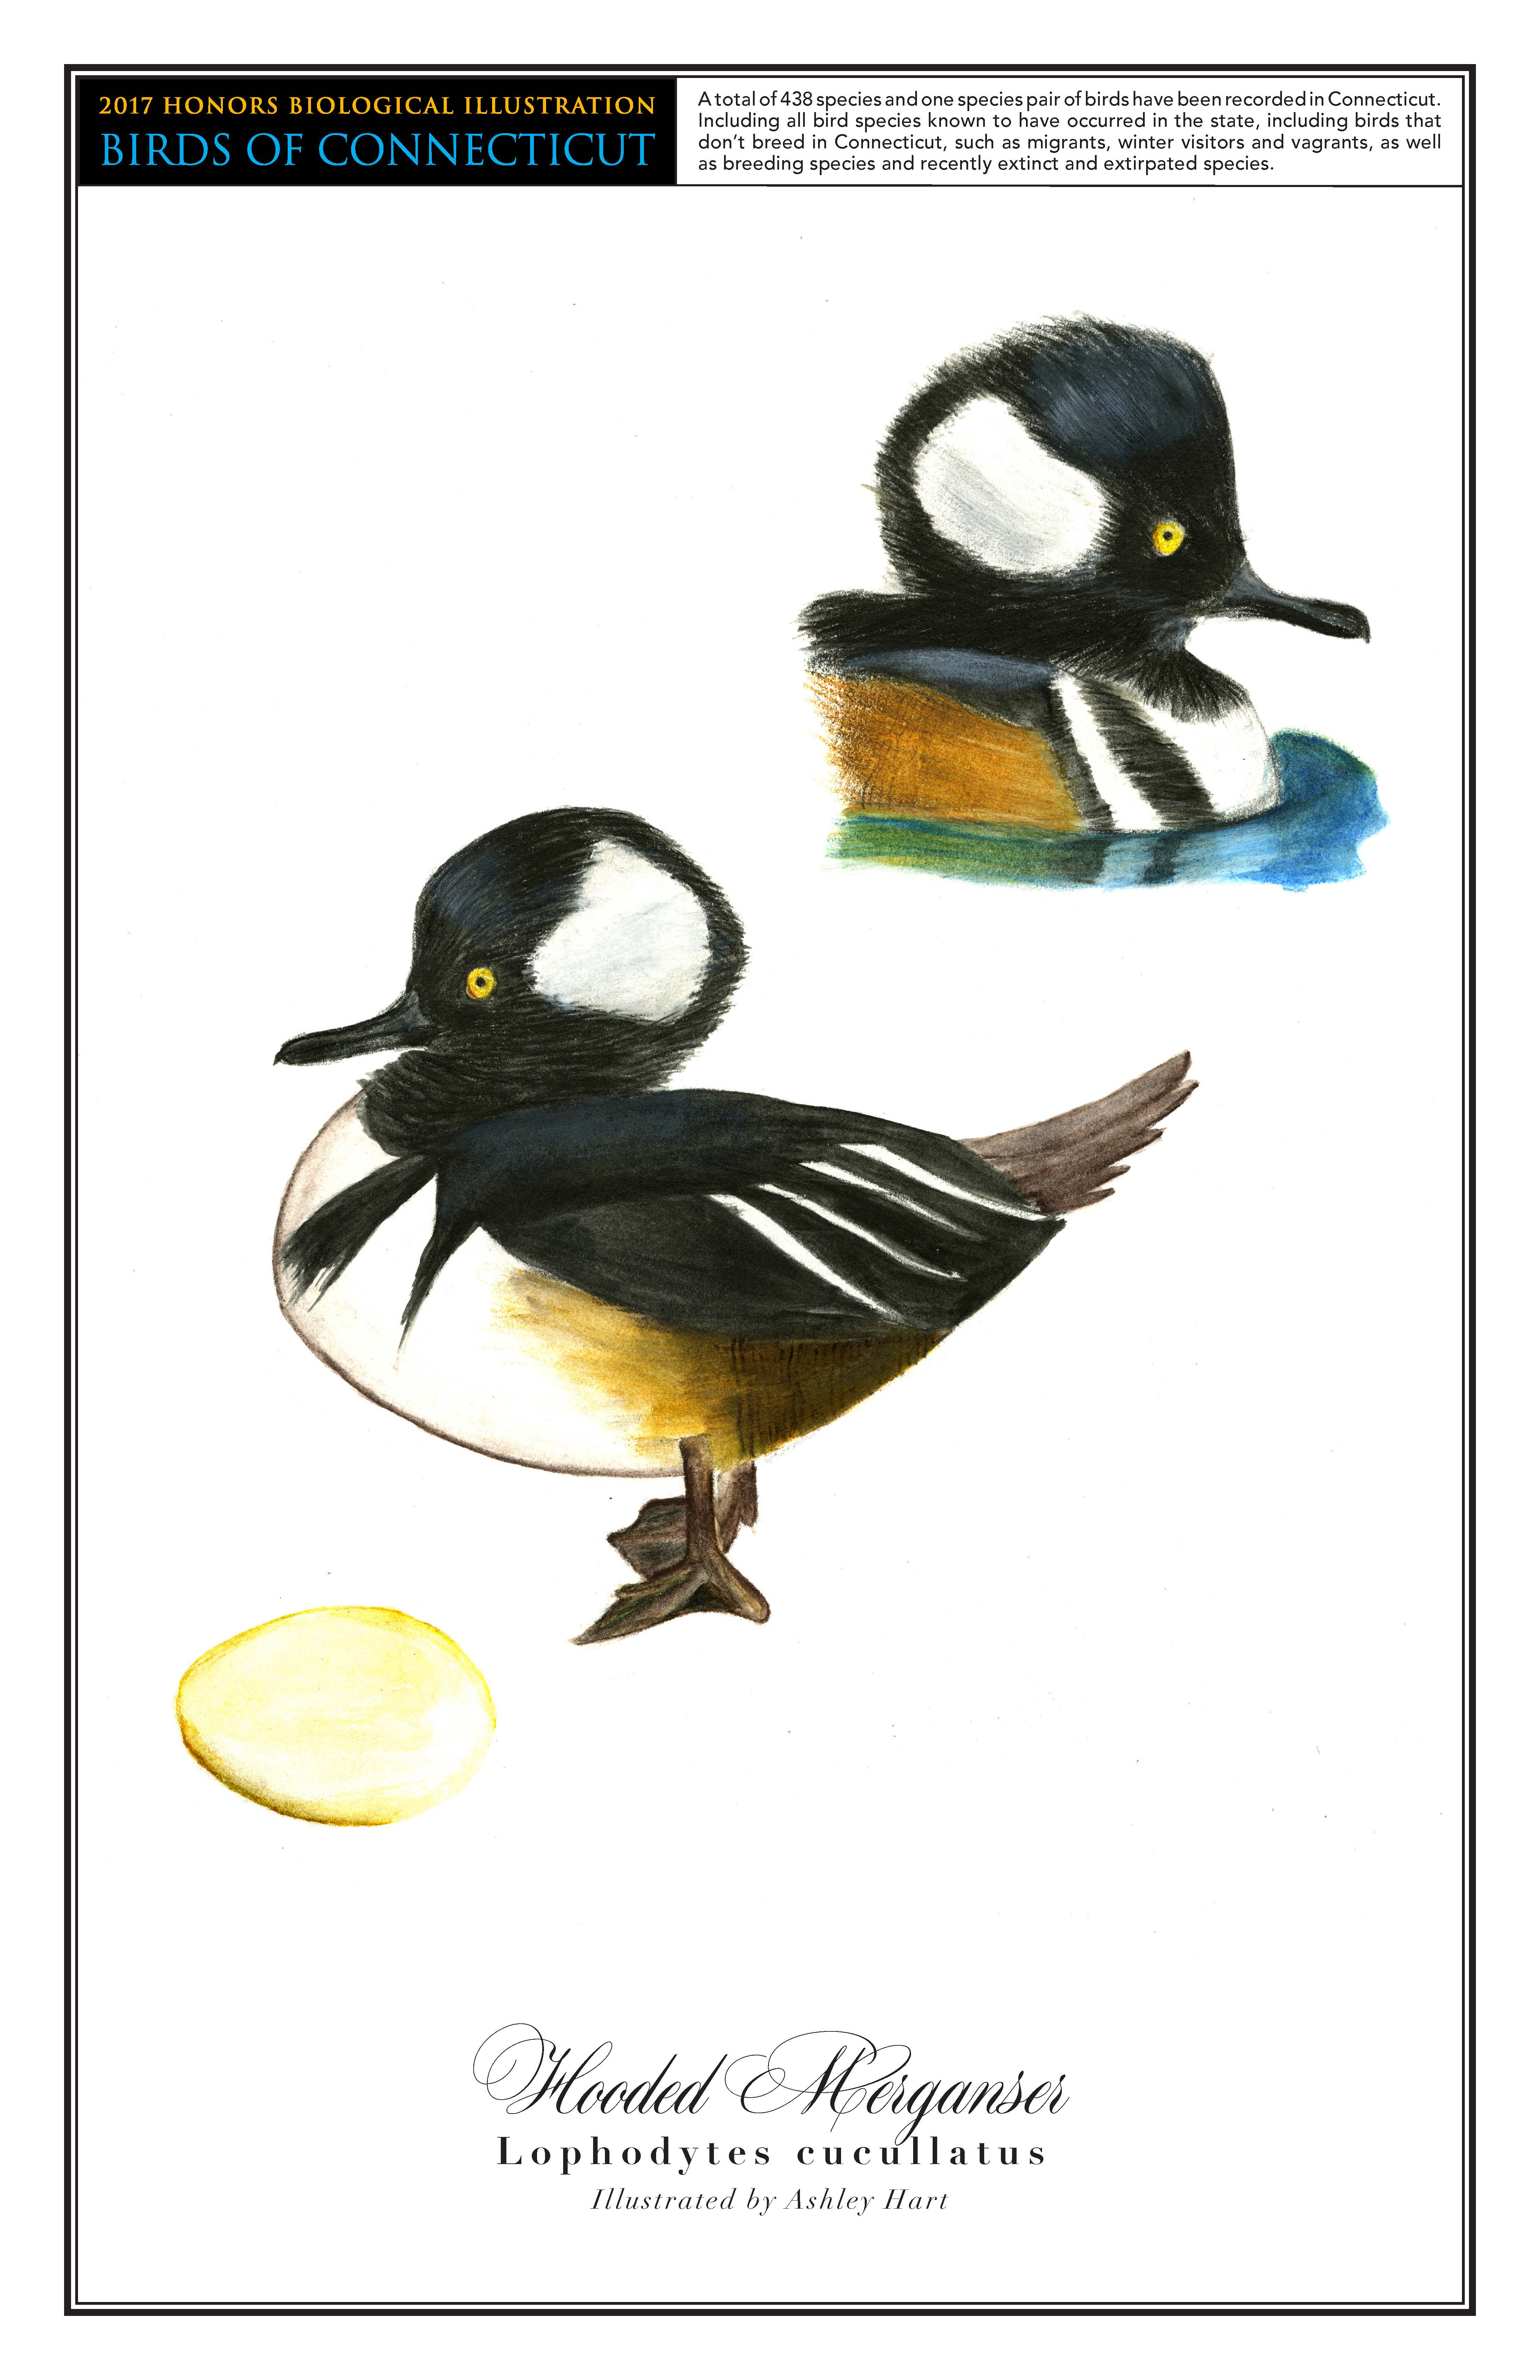 A drawing of the Hooded Merganser is in the center of the page. The bird has a black head with a large white spot on the side and a black and white body. A drawing of the bird sitting in water is in the top right corner. A drawing of its cream-colored egg is in the bottom left.